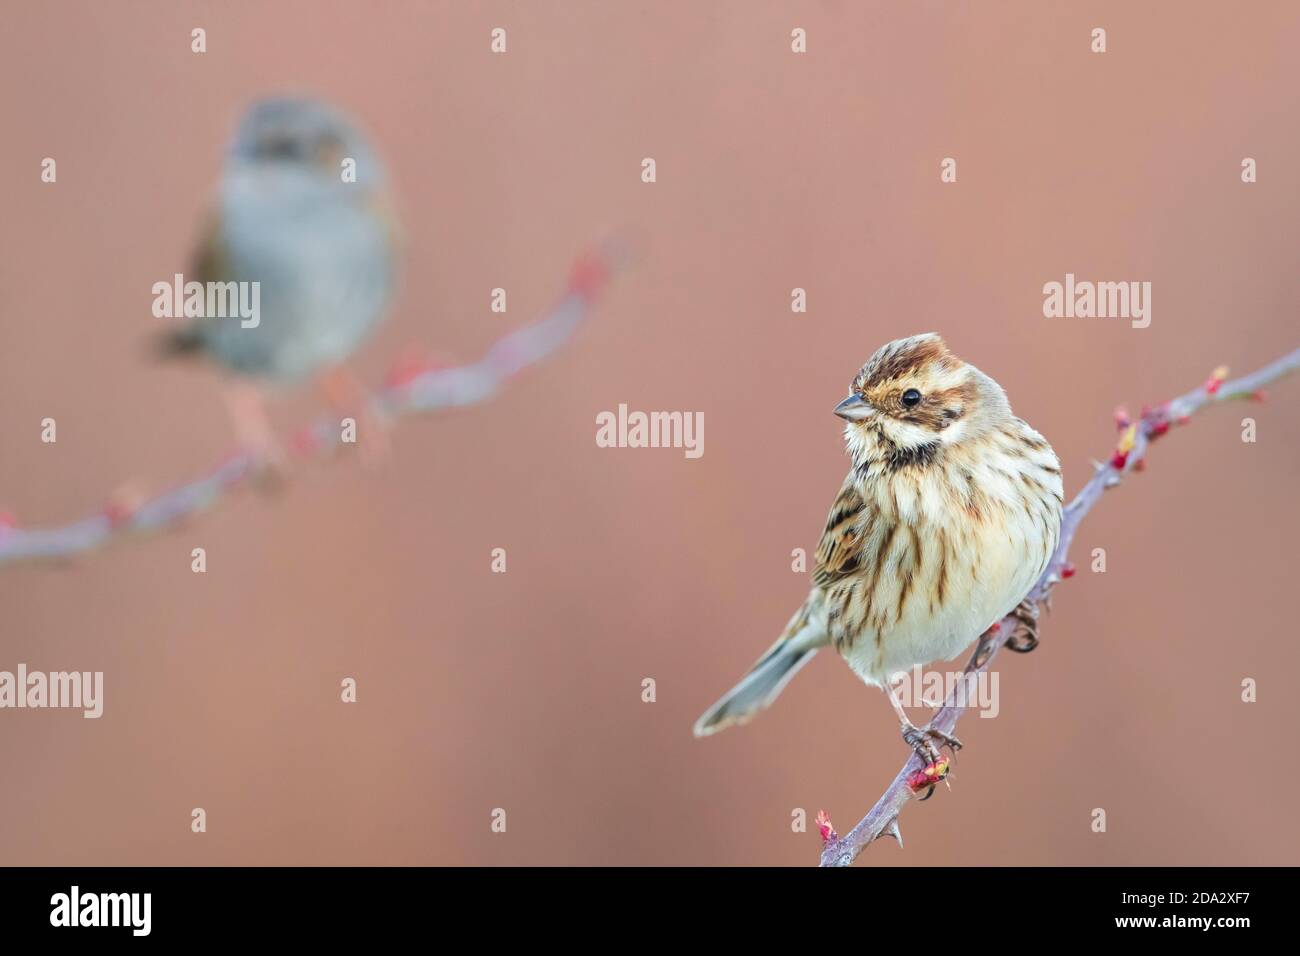 reed bunting (Emberiza schoeniclus), perching on a twig, dunnock in the background., Italy, Piana fiorentina Stock Photo